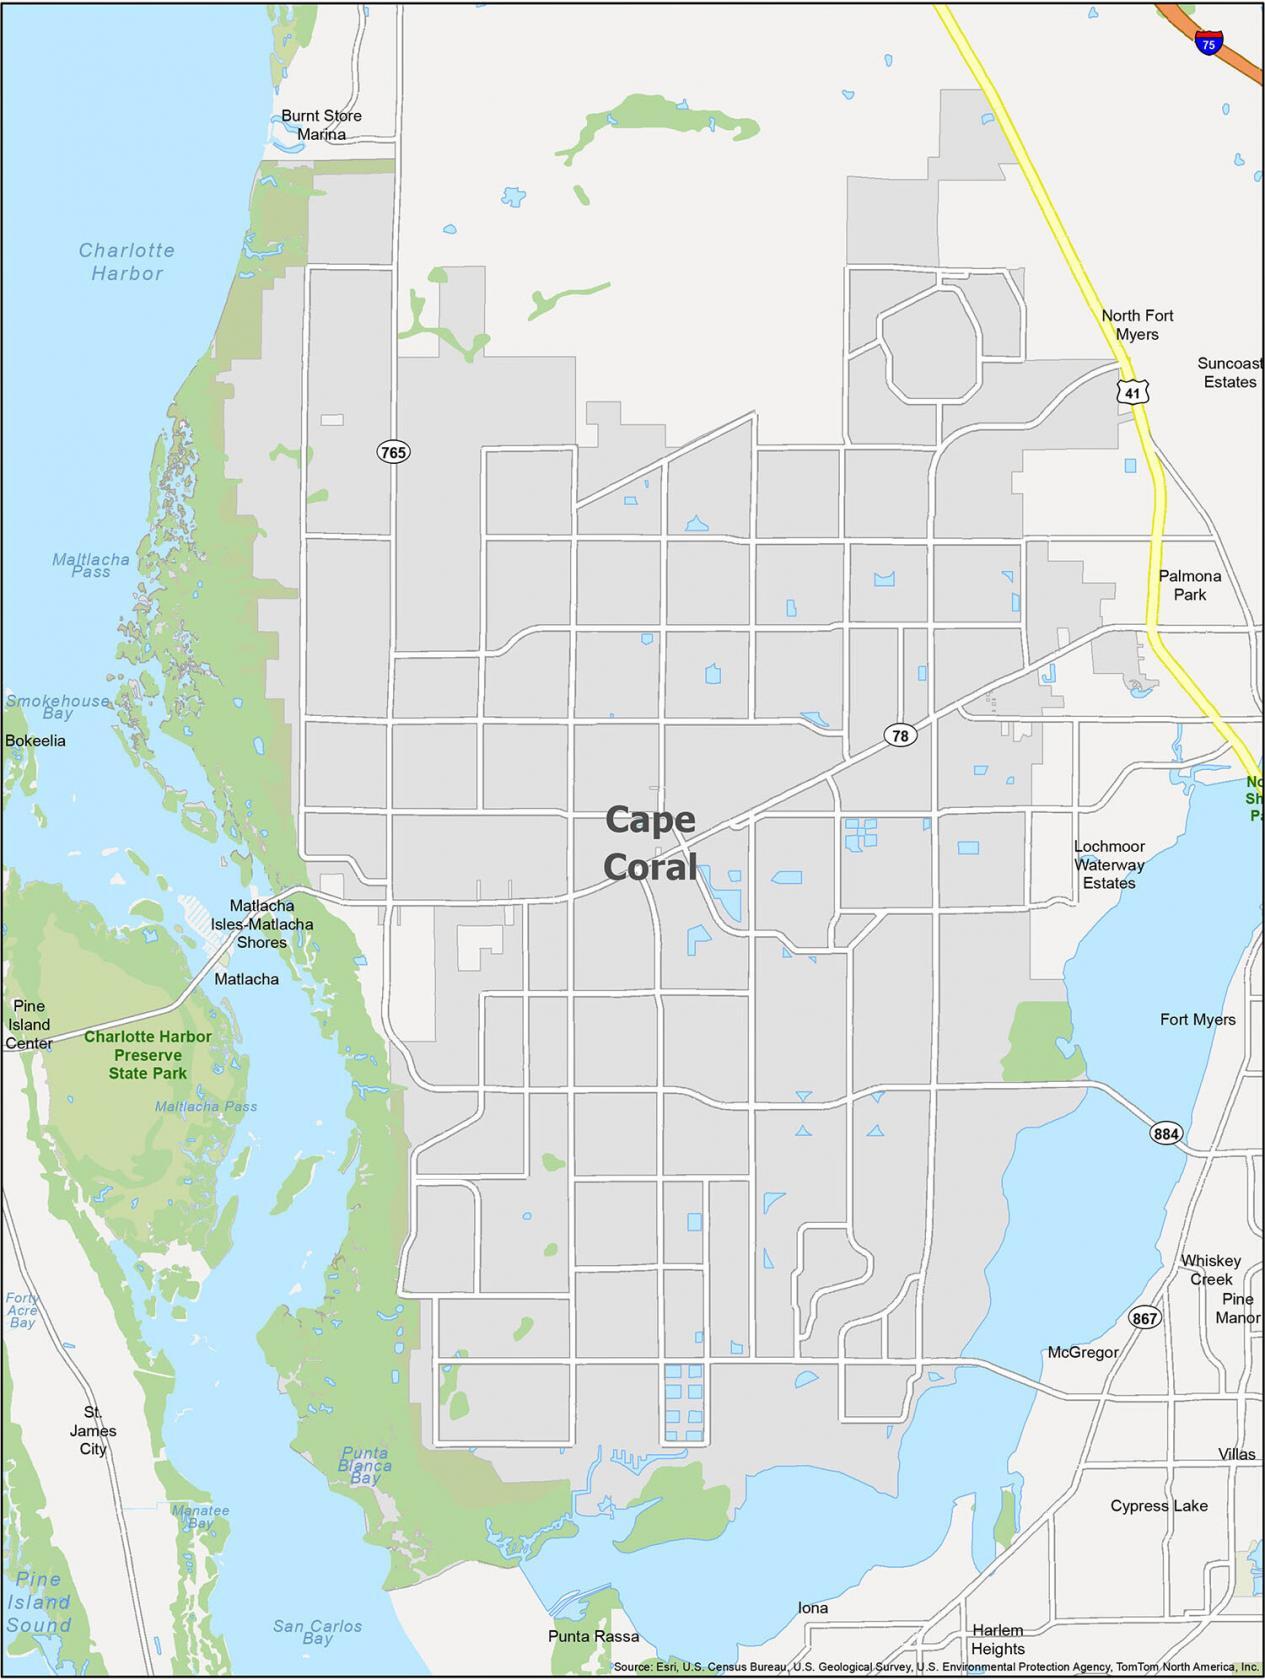 Cape Coral Florida Map - GIS Geography